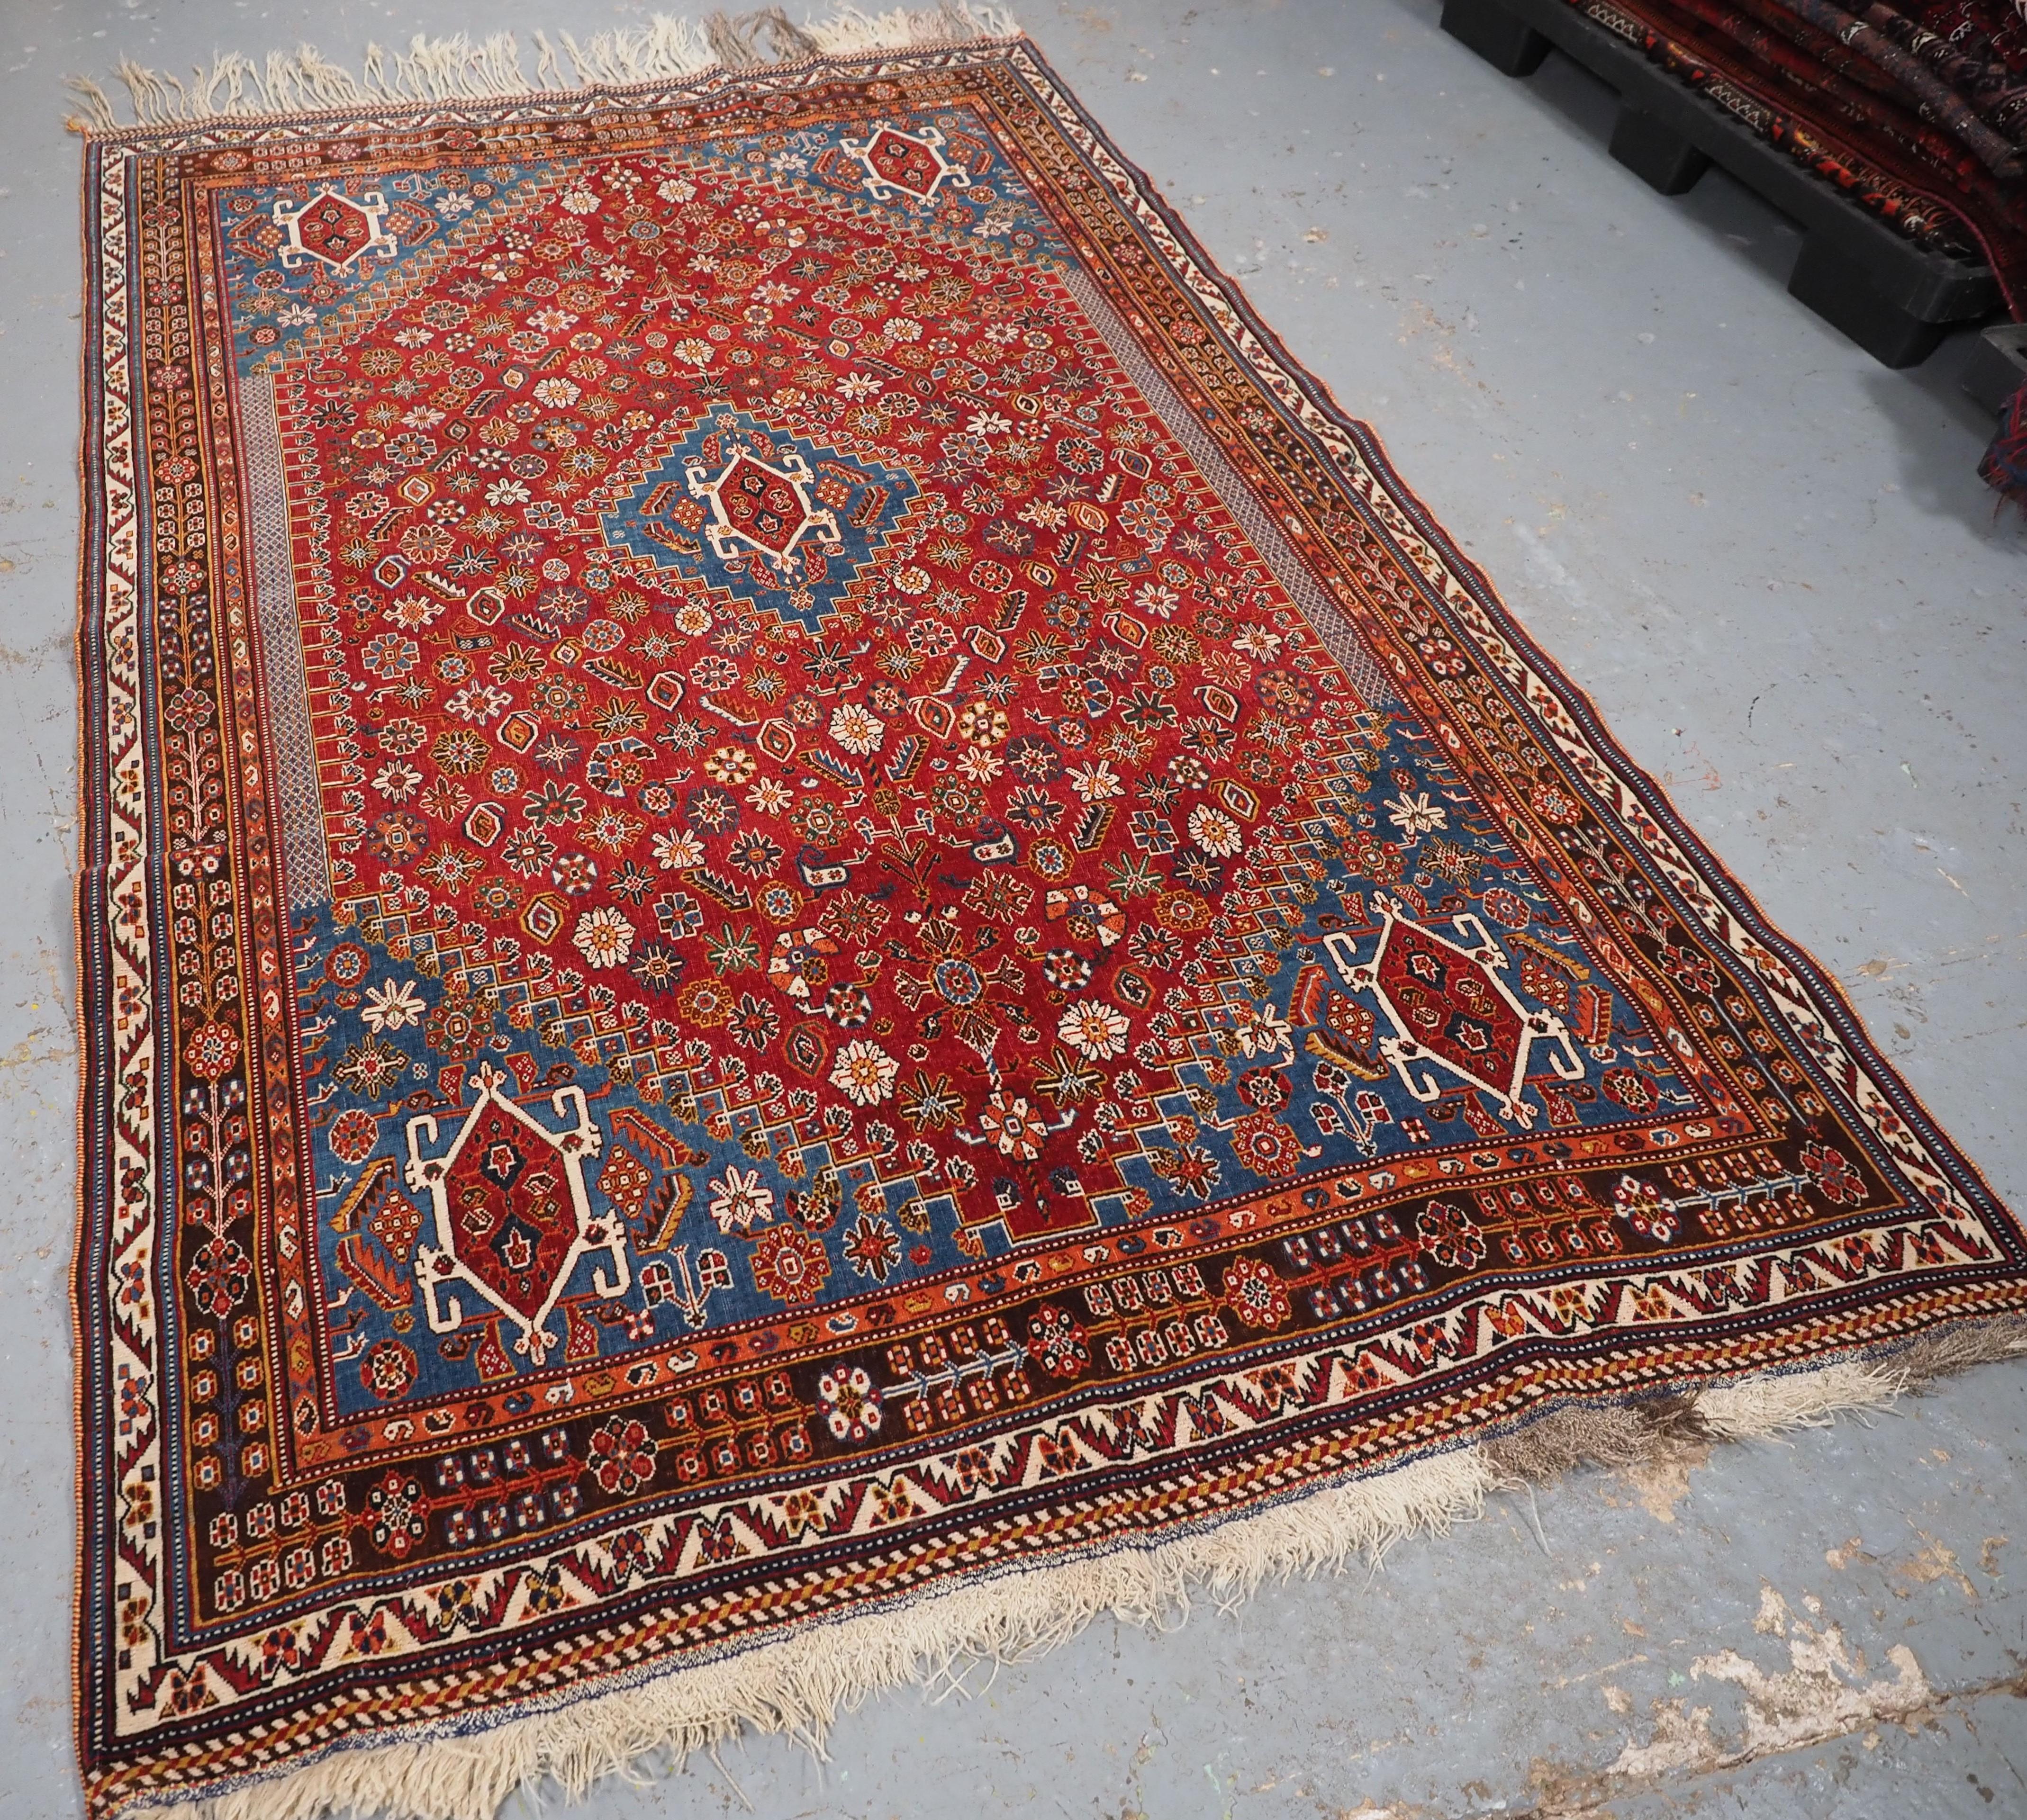 Size: 7ft 9in x 4ft 11in (237 x 149cm).

Antique Qashqai tribal rug with small central medallion.

Circa 1890.

An outstanding Qashqai tribal rug with a small central medallion of a clear madder red field. The rug is covered with floral rosettes and